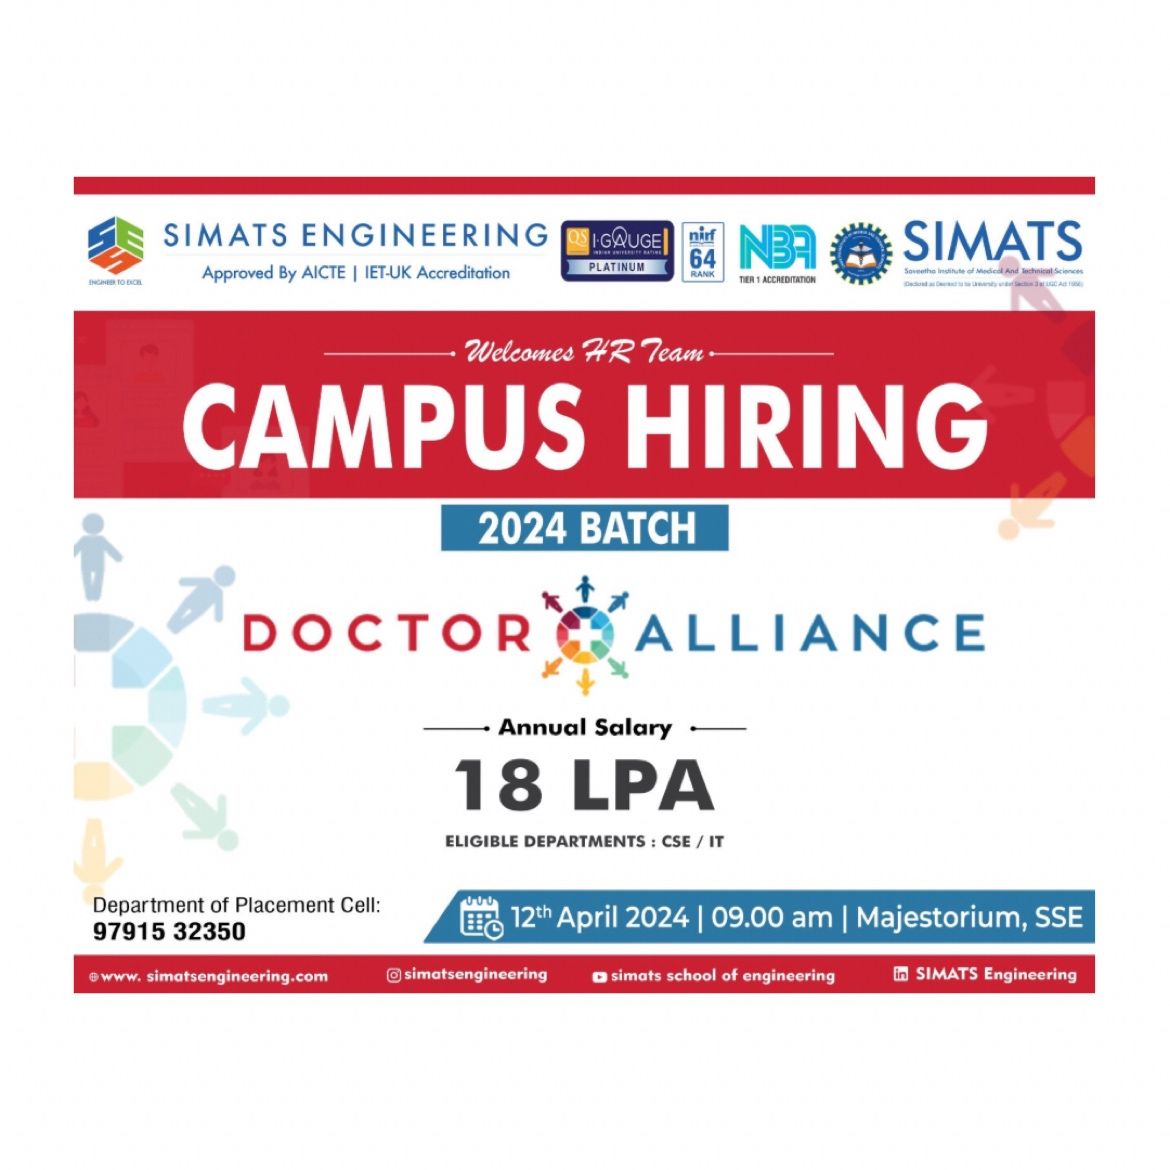 “CAMPUS HIRING!”
Exciting news! Doctor Alliance is on the hunt for fresh talent from our campus for the 2024 batch. Get ready to seize the opportunity tomorrow!